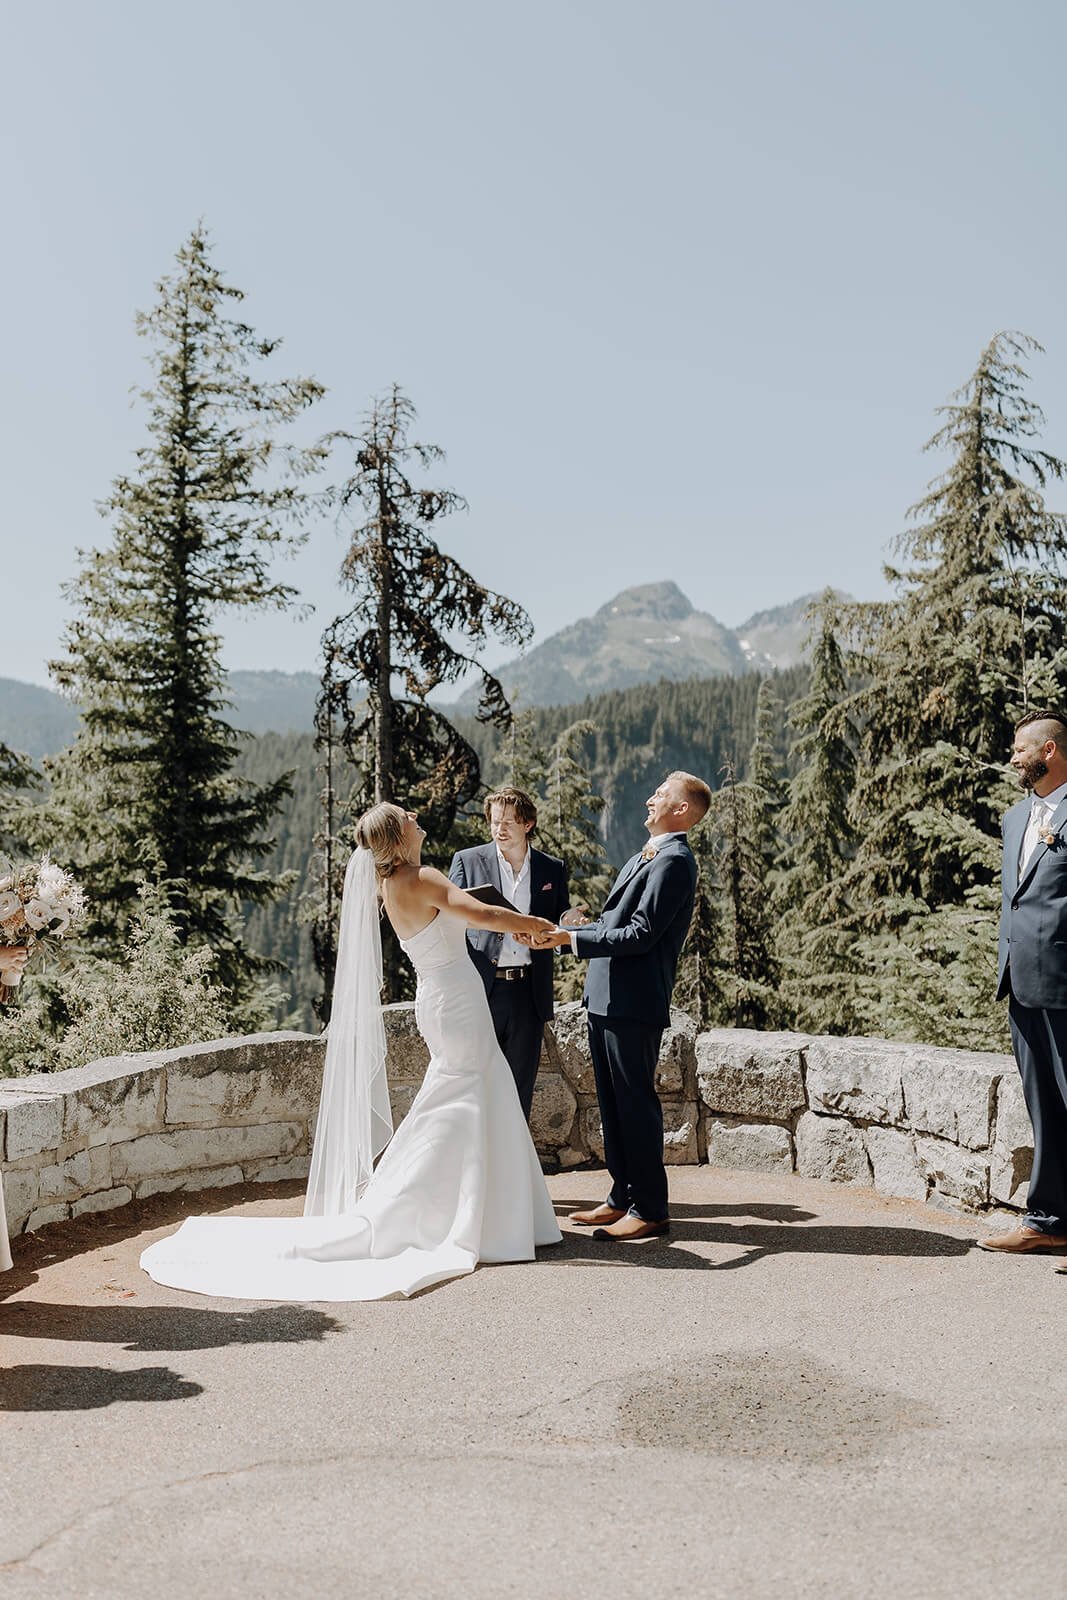 Bride and groom laughing during Mount Rainier wedding ceremony